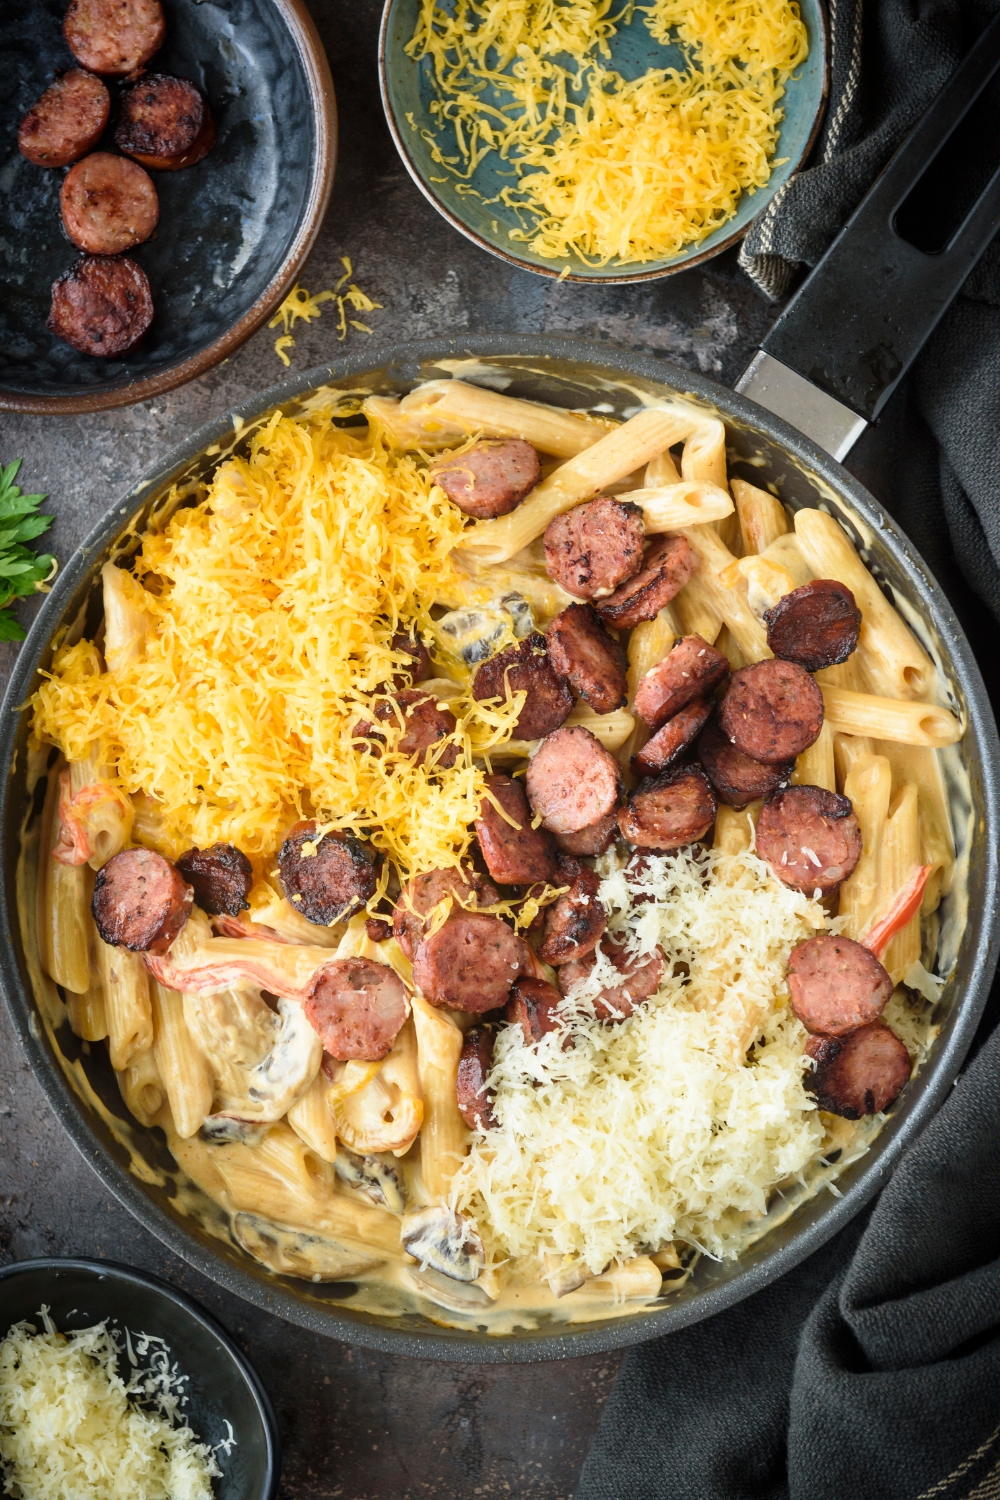 A skillet filled with cooked pasta in cream sauce with shredded cheese and sliced sausages.